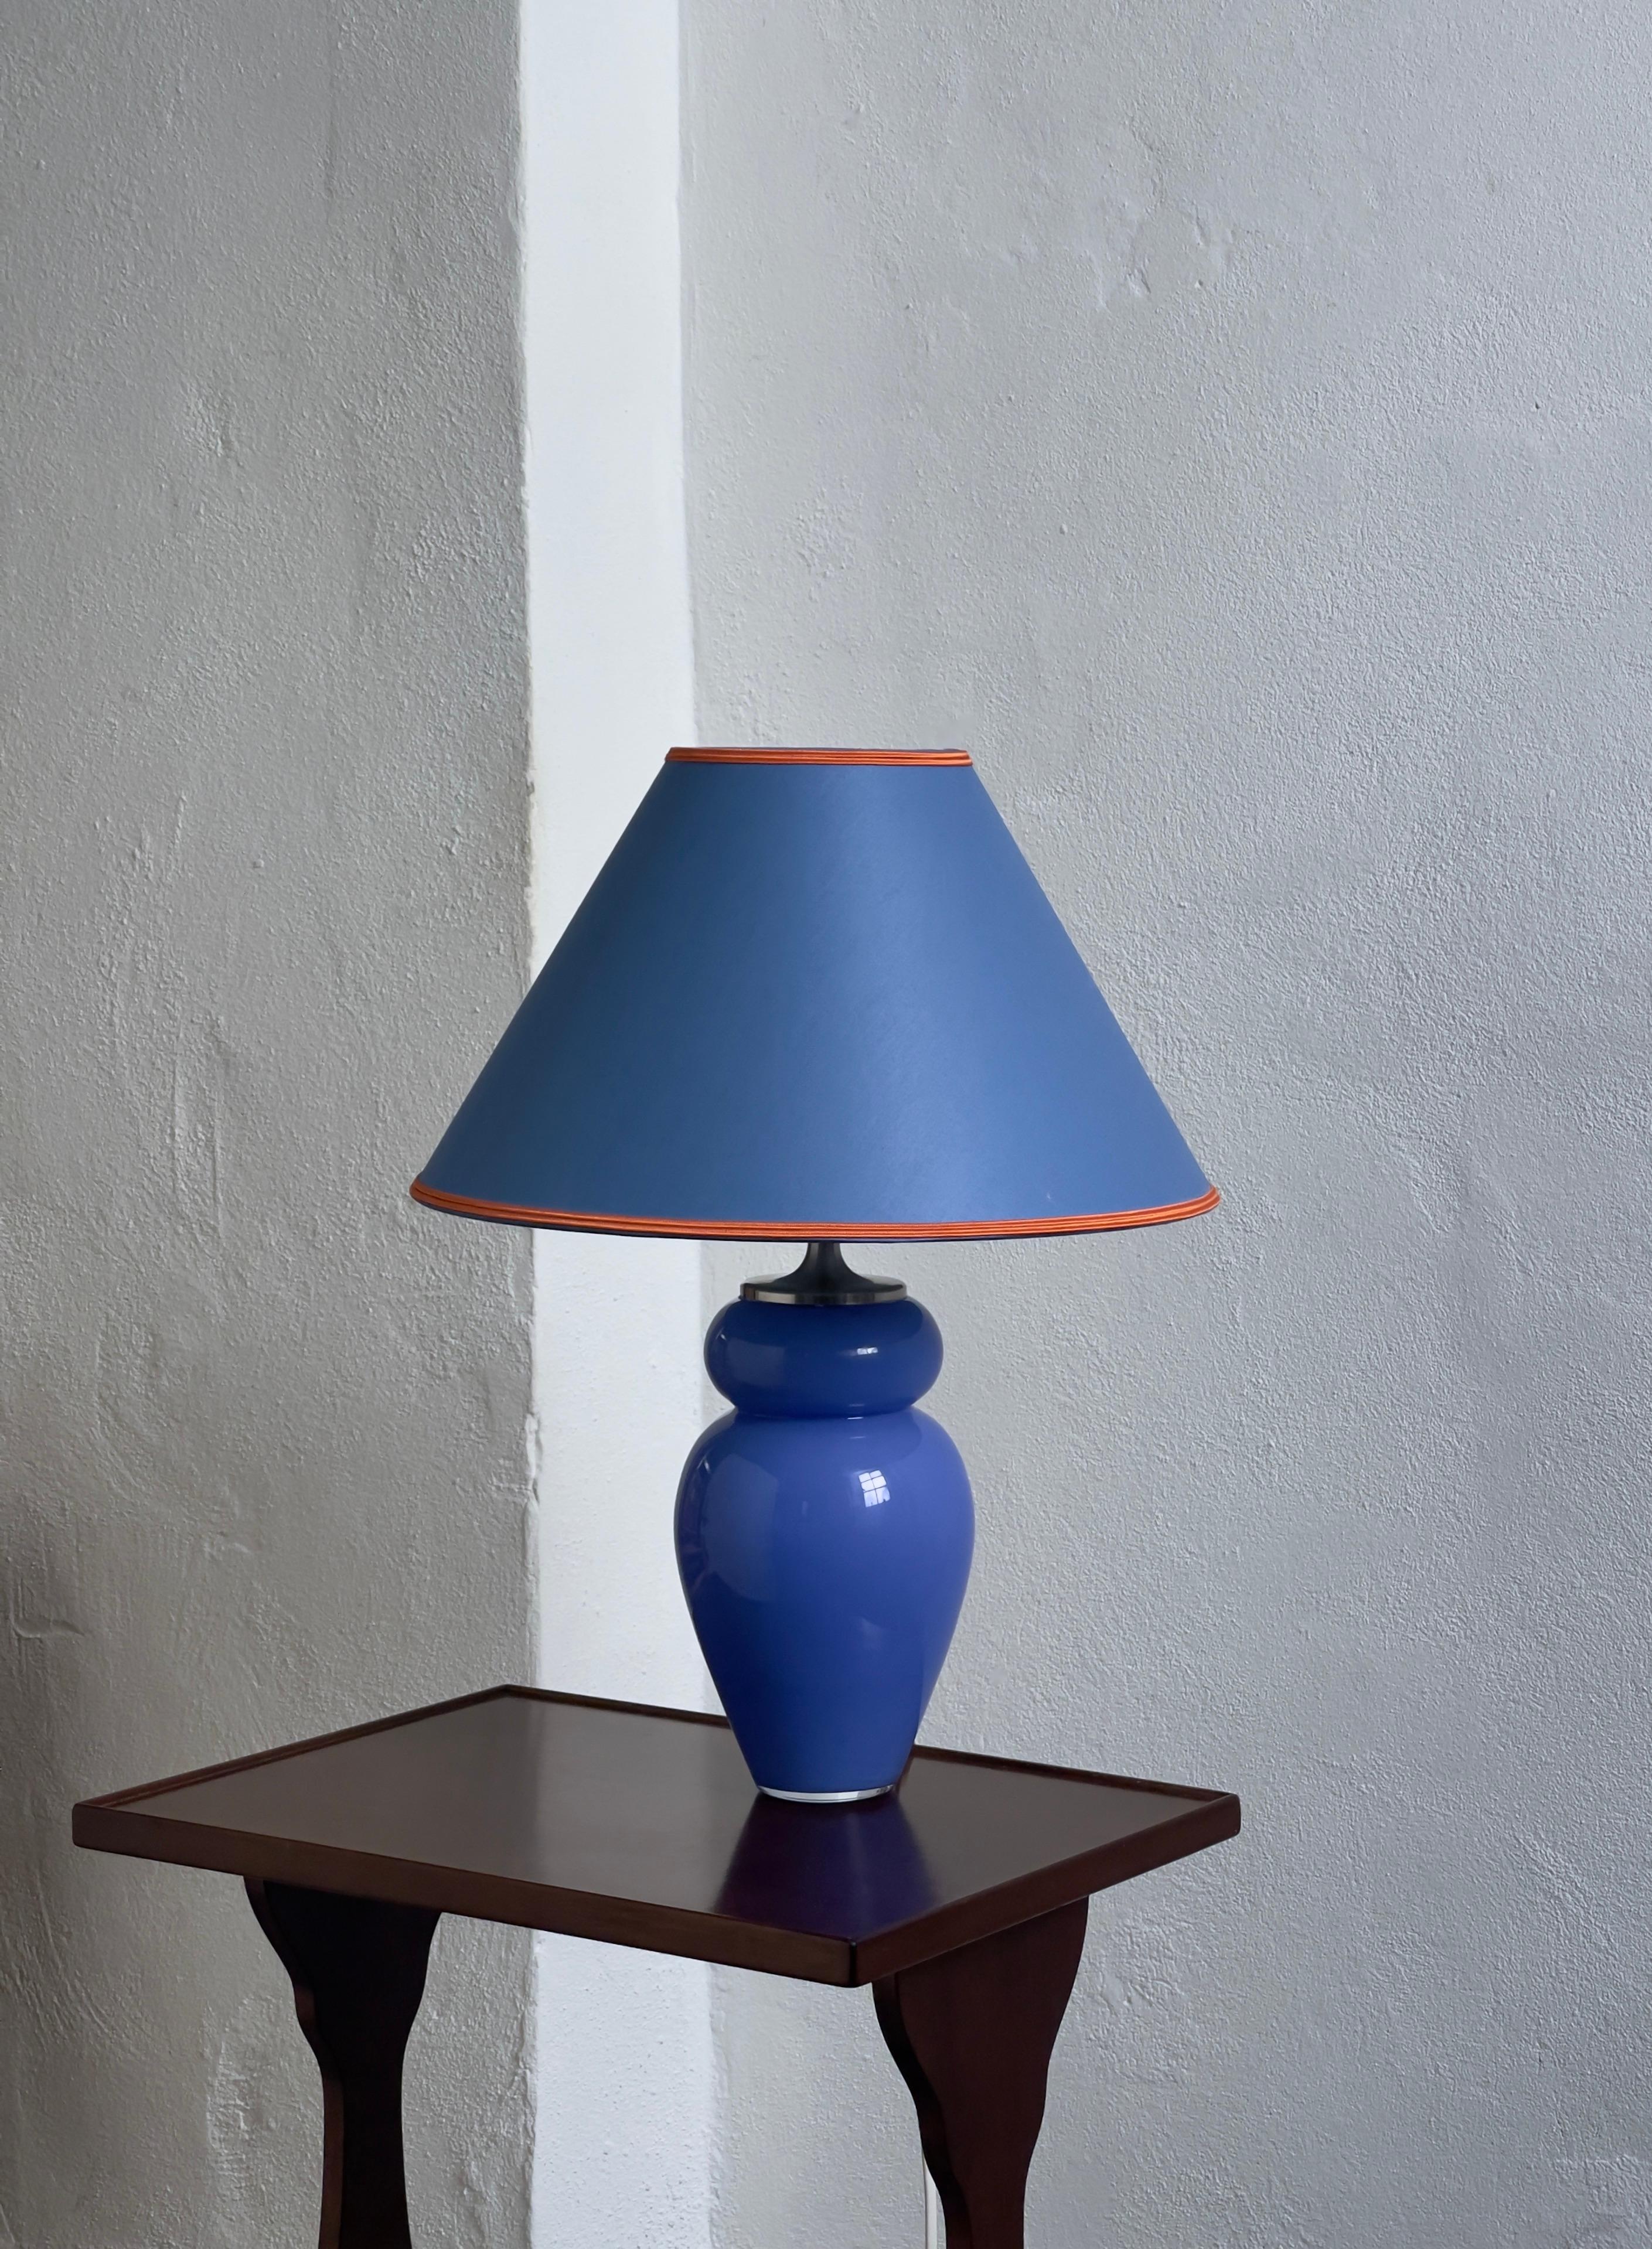 1980s Original Royal Copenhagen blue crystal glass table lamp with original blue silk lamp shade featuring an orange thread. The lamp is in good condition and brings a elegant spark into your modern interior design.